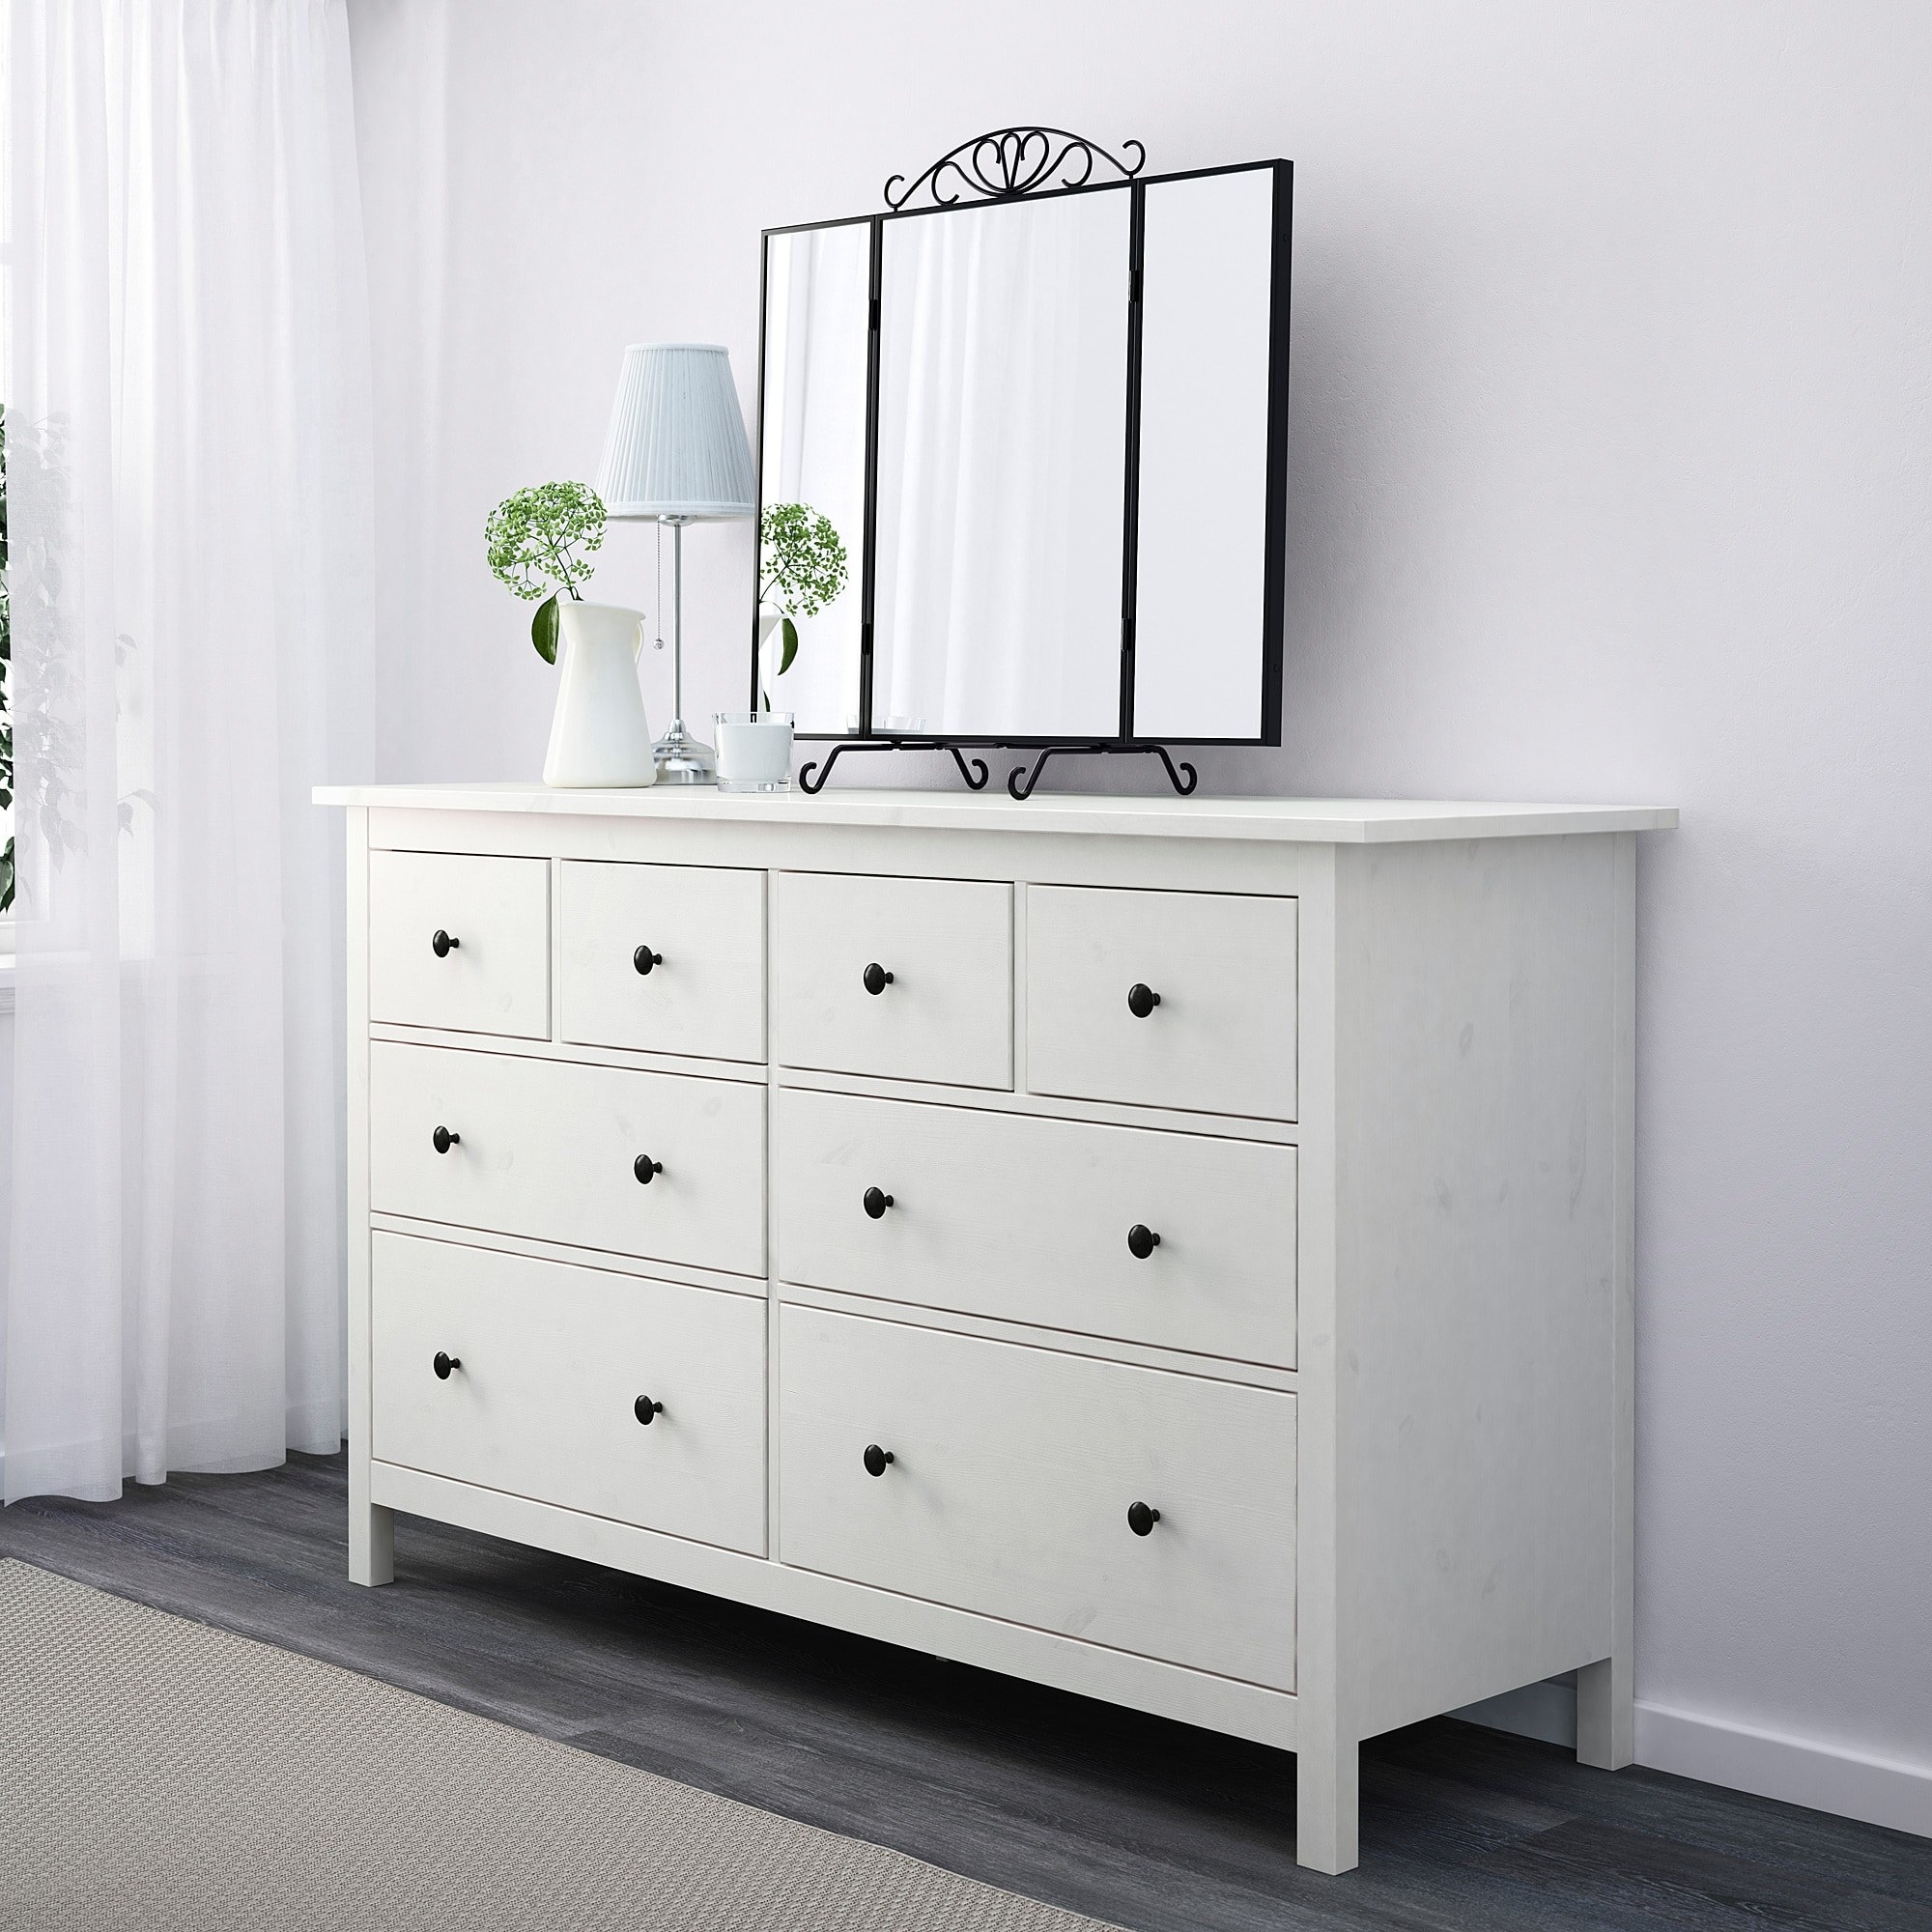 White dresser with eight drawers of different sizes and black handles